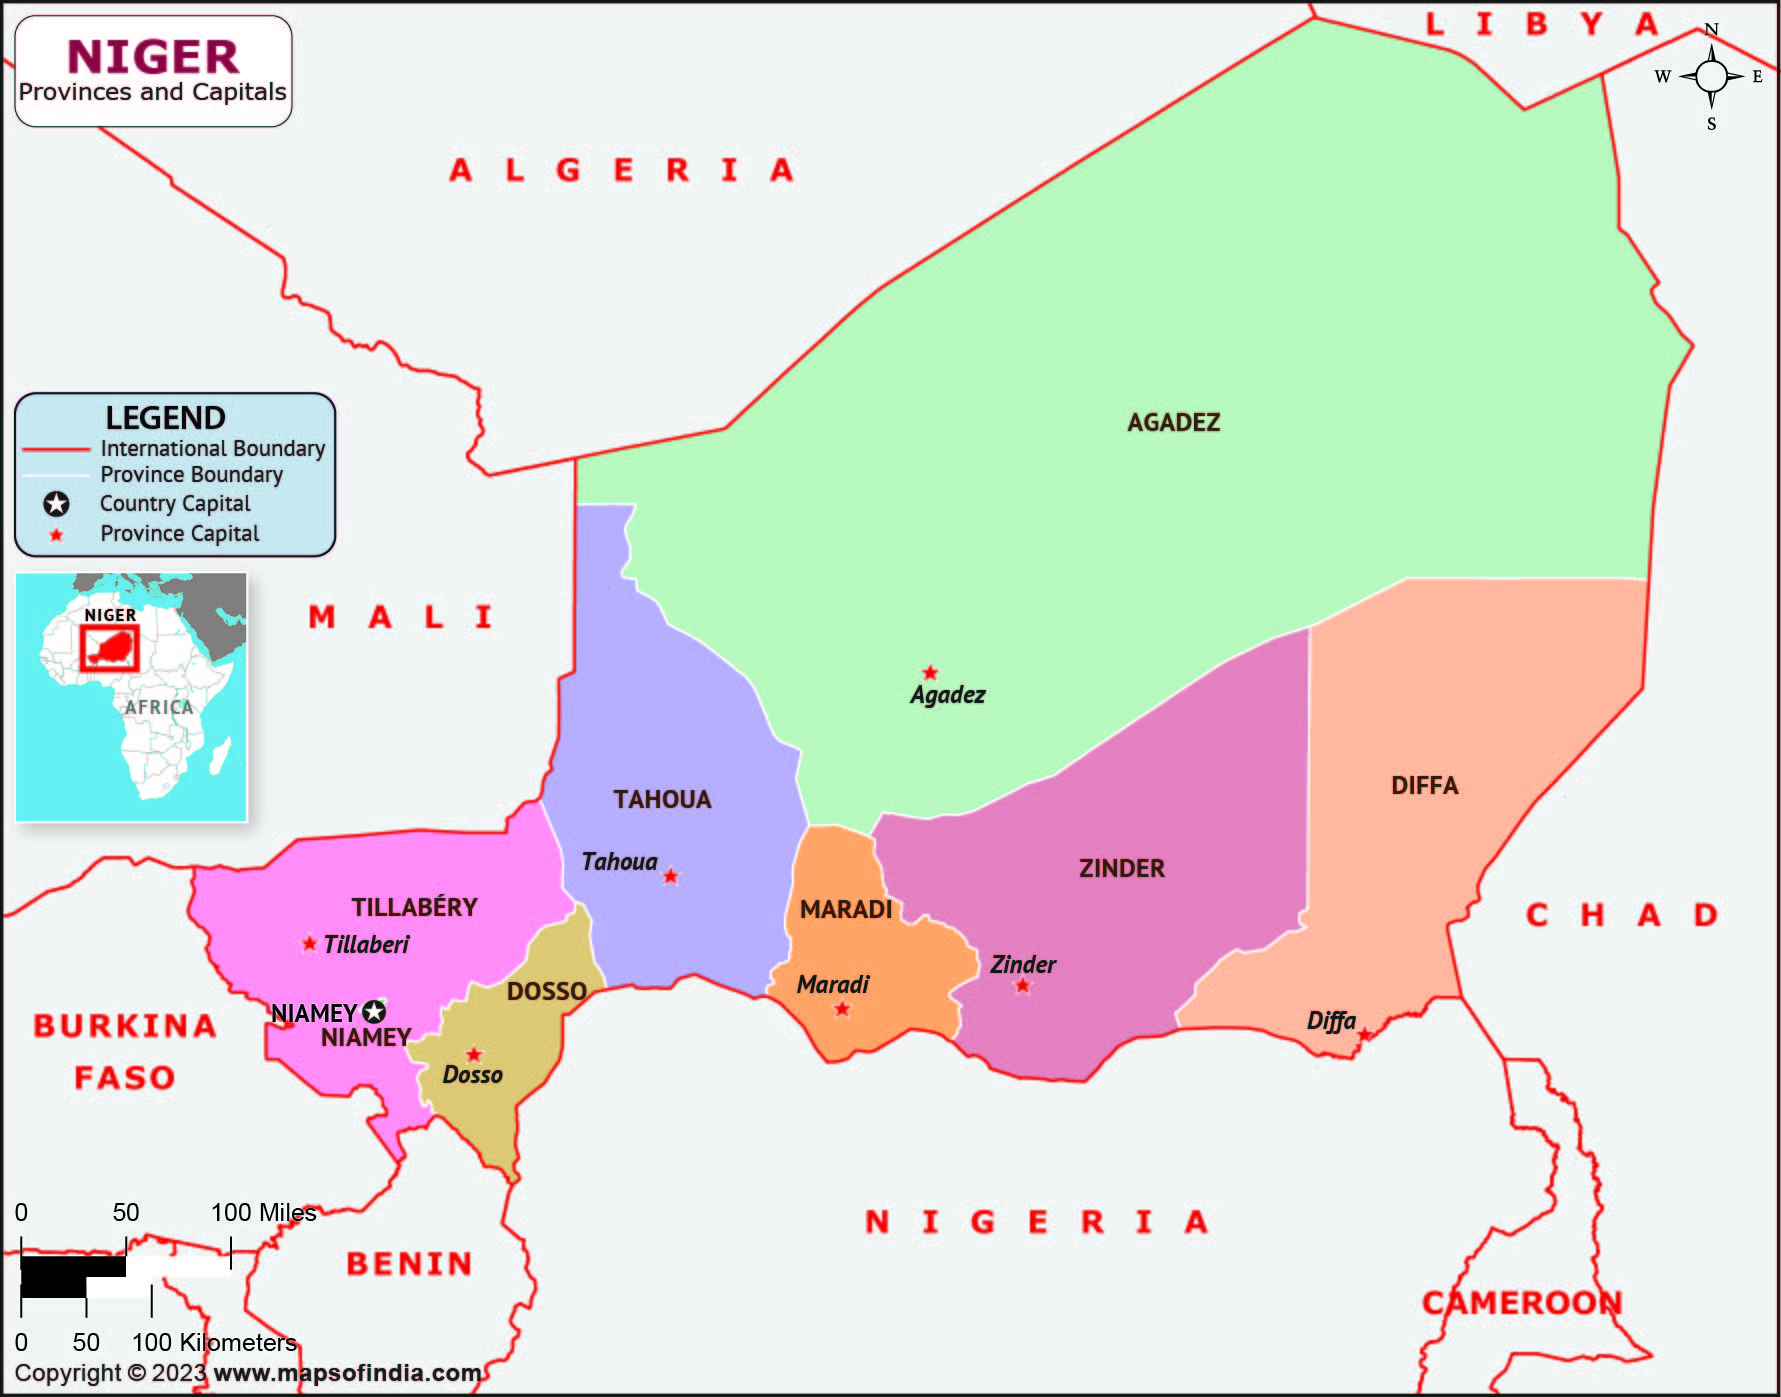 Niger Provinces and Capitals List and Map | List of Provinces and ...